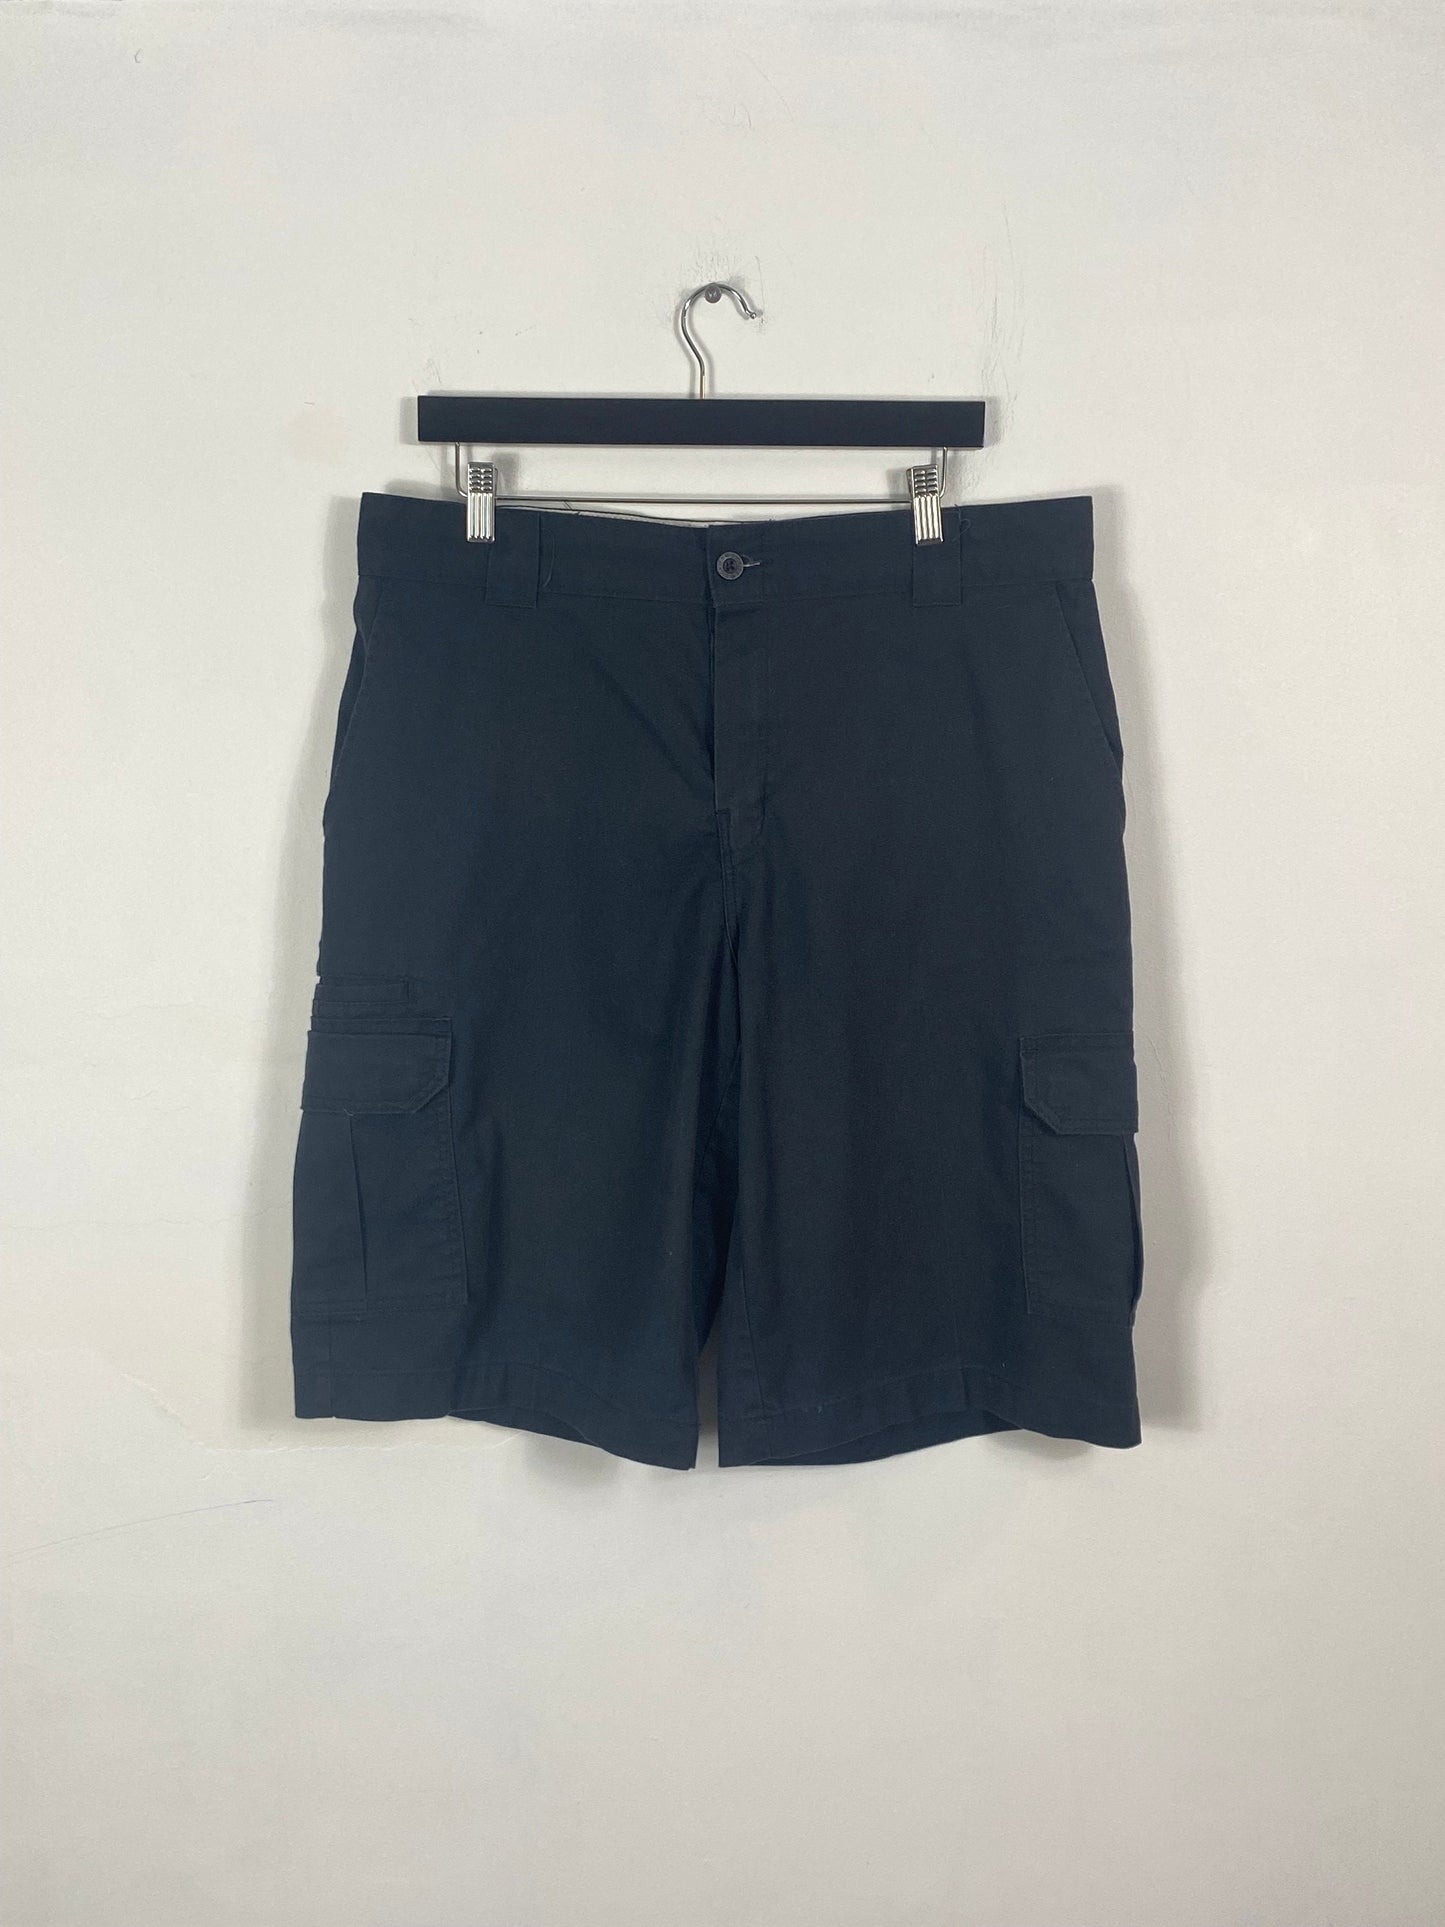 Dickies Shorts / 90s Vintage Canvas Cargo Trunks / Streetwear / Hip Hop Clothing / Size 36